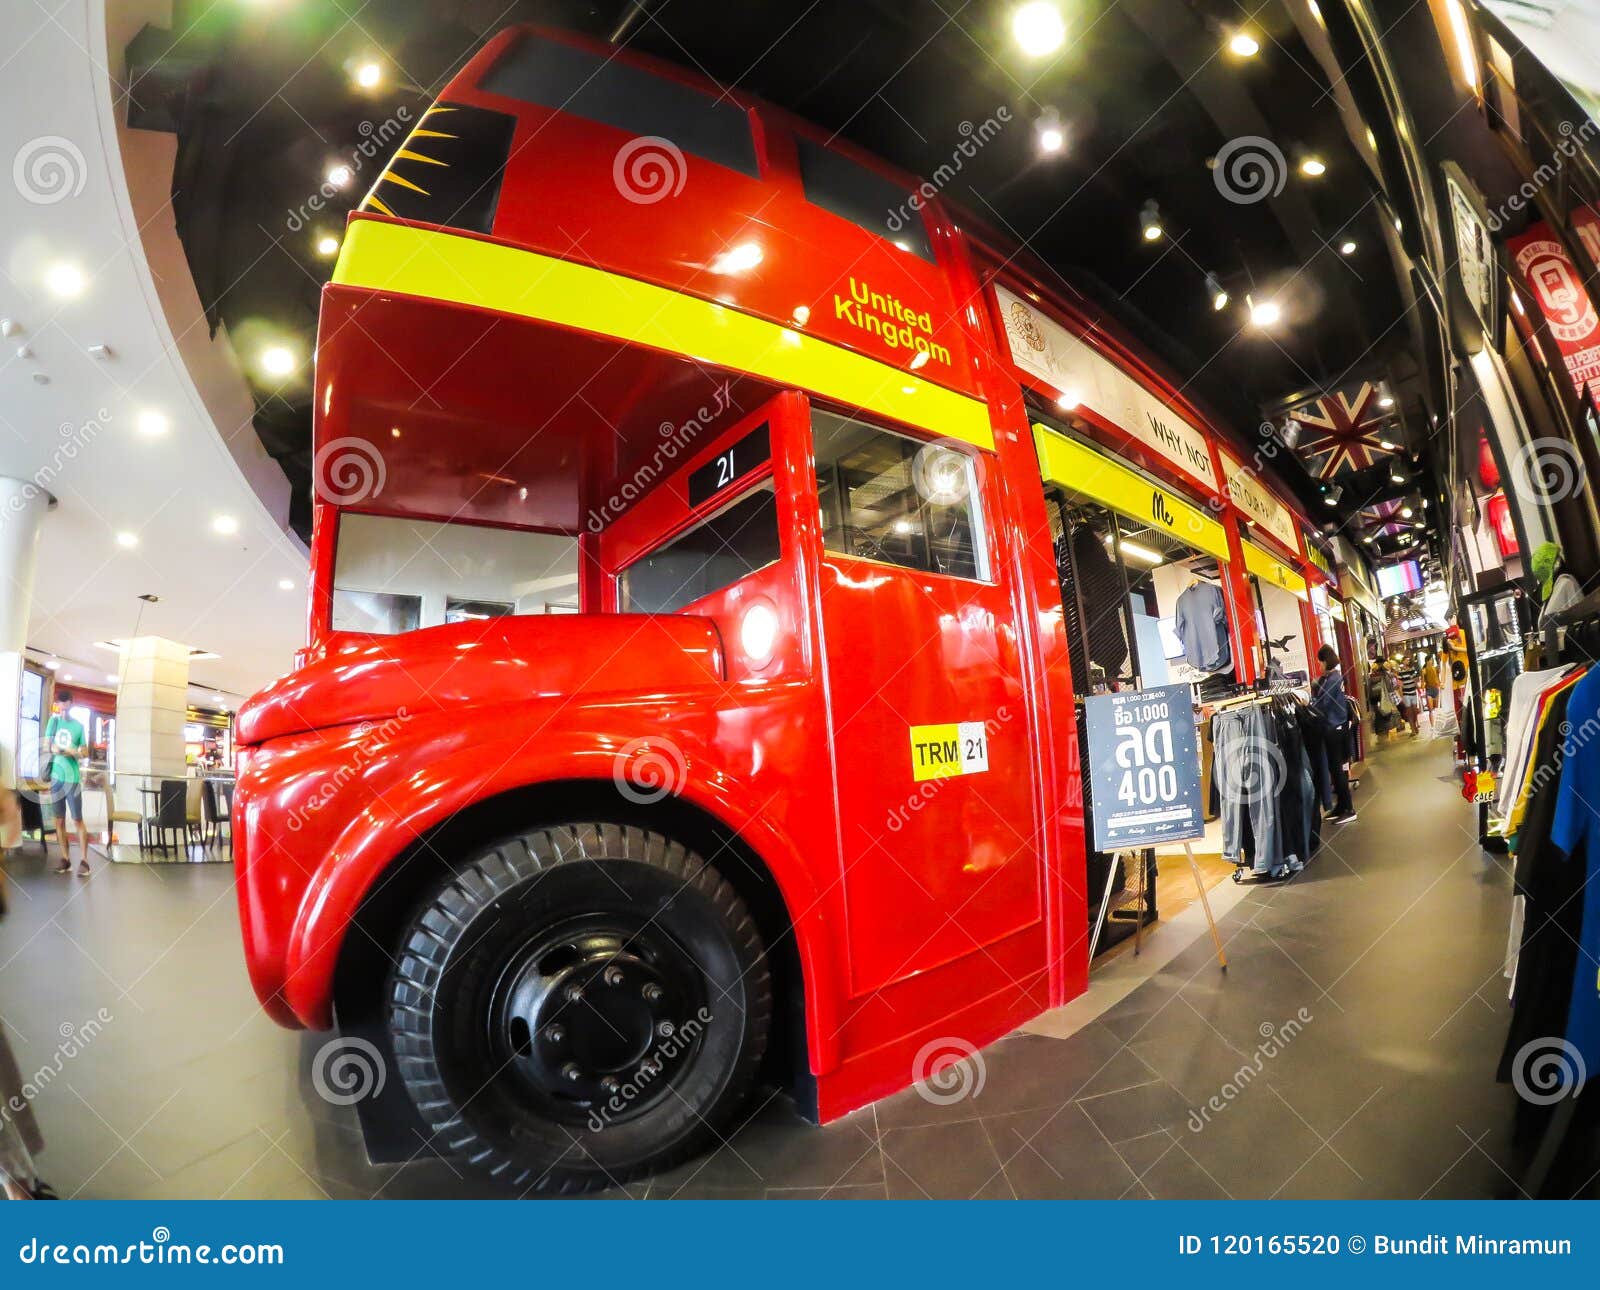 Mc Jeans Shop in Beautiful of London Double Decker Bus at Terminal 21 Shopping Mall. Editorial Image - Image of bangkok, 120165520